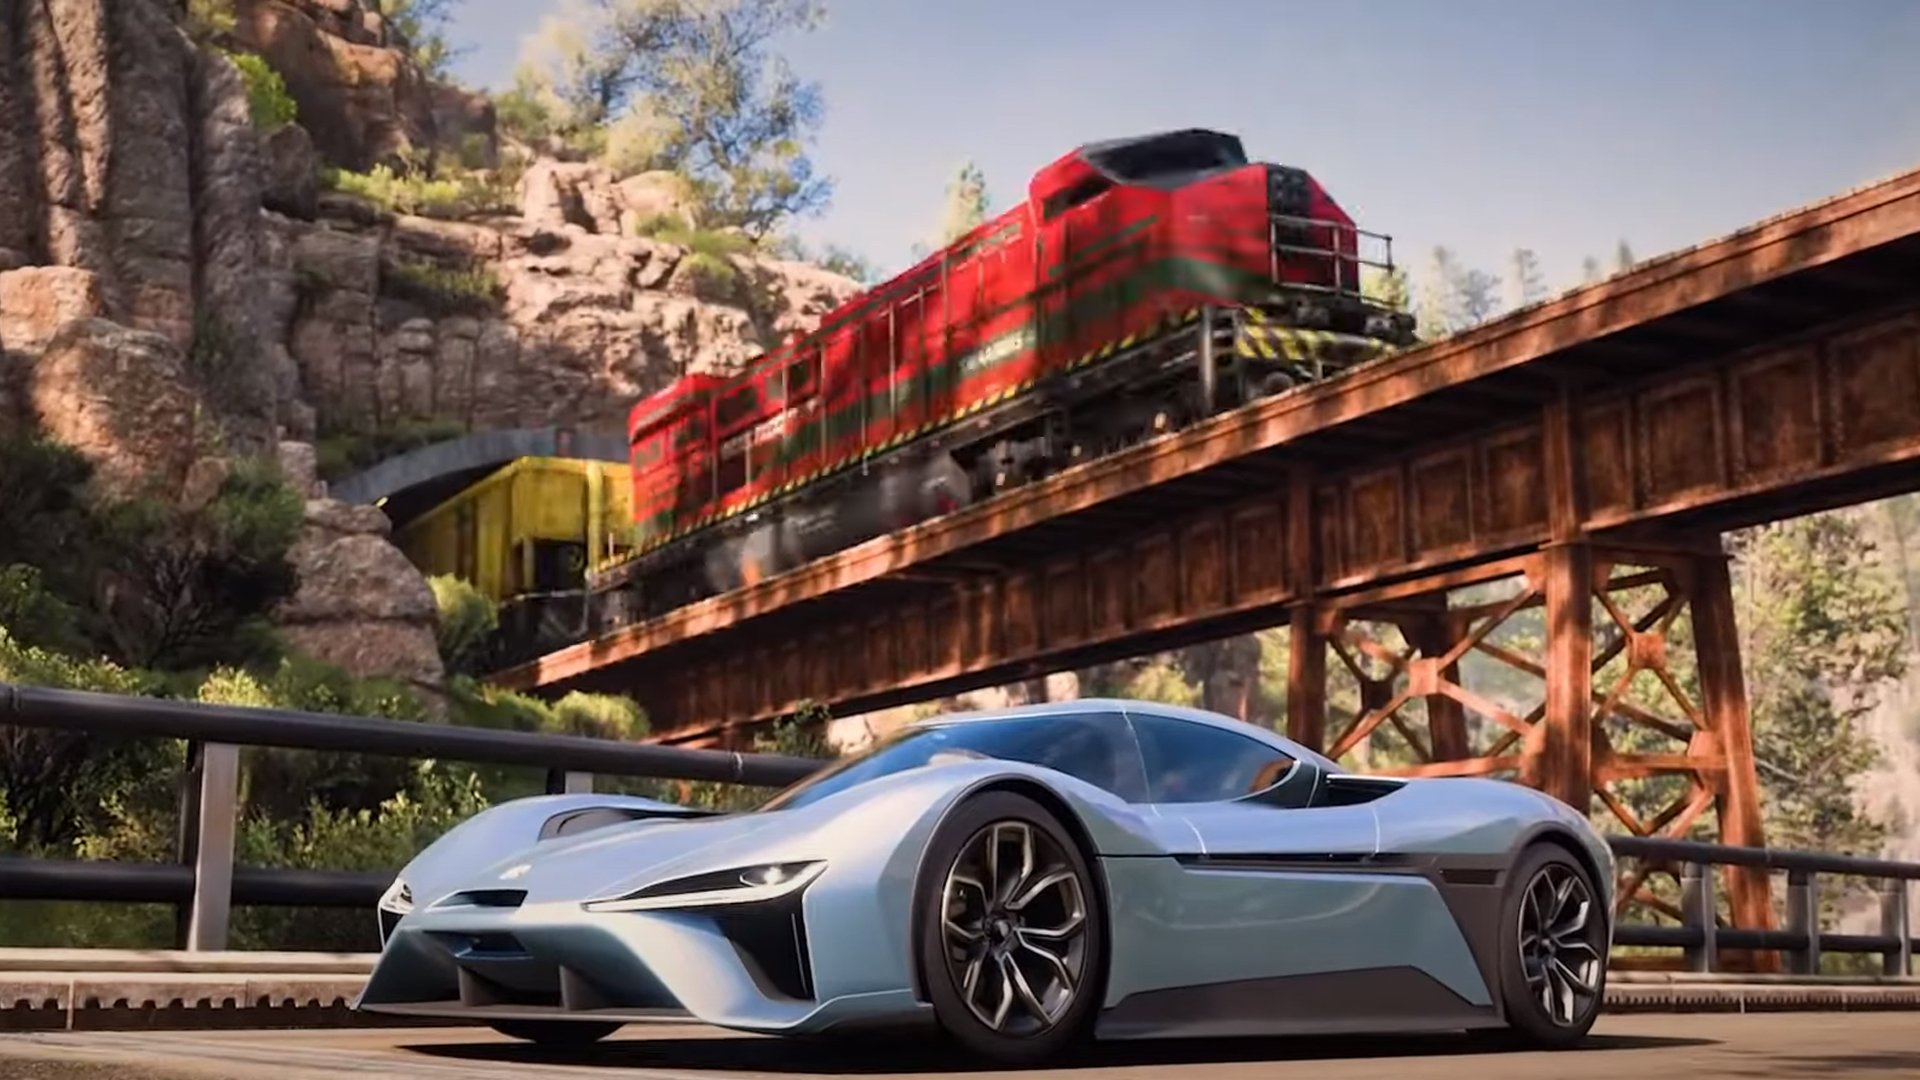 Forza Horizon 5 Series 4 includes new Chinese cars Horizon World Cup